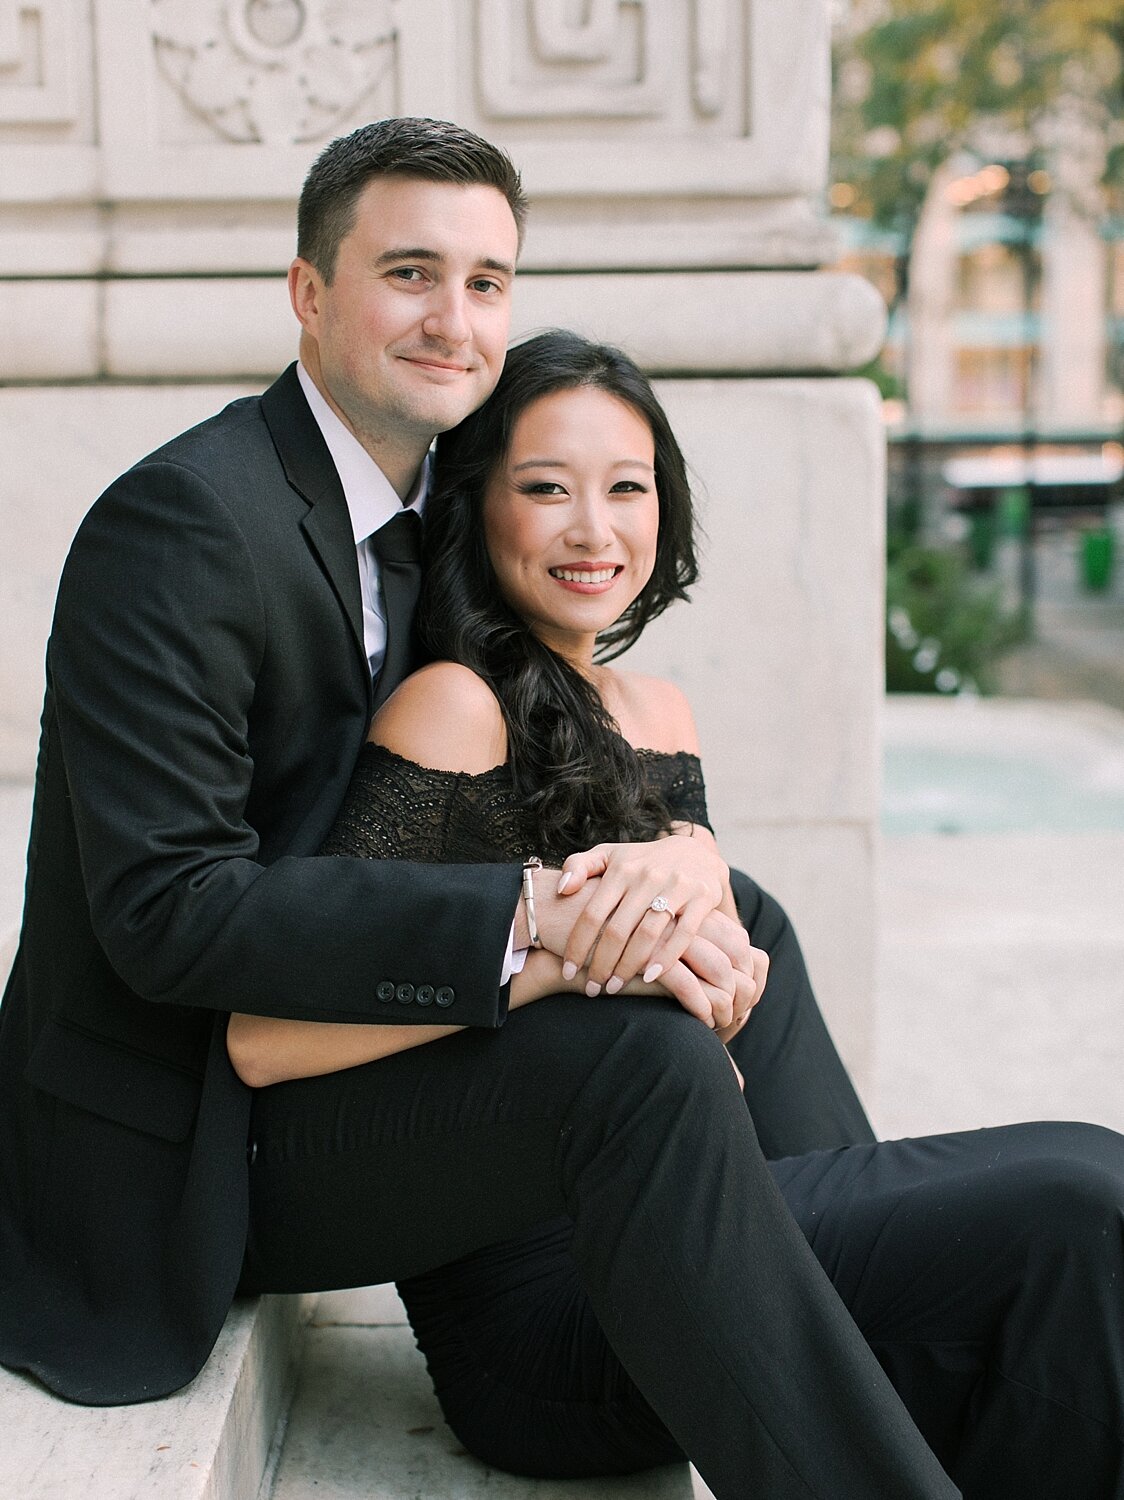 classic New York City engagement portraits by Asher Gardner Photography